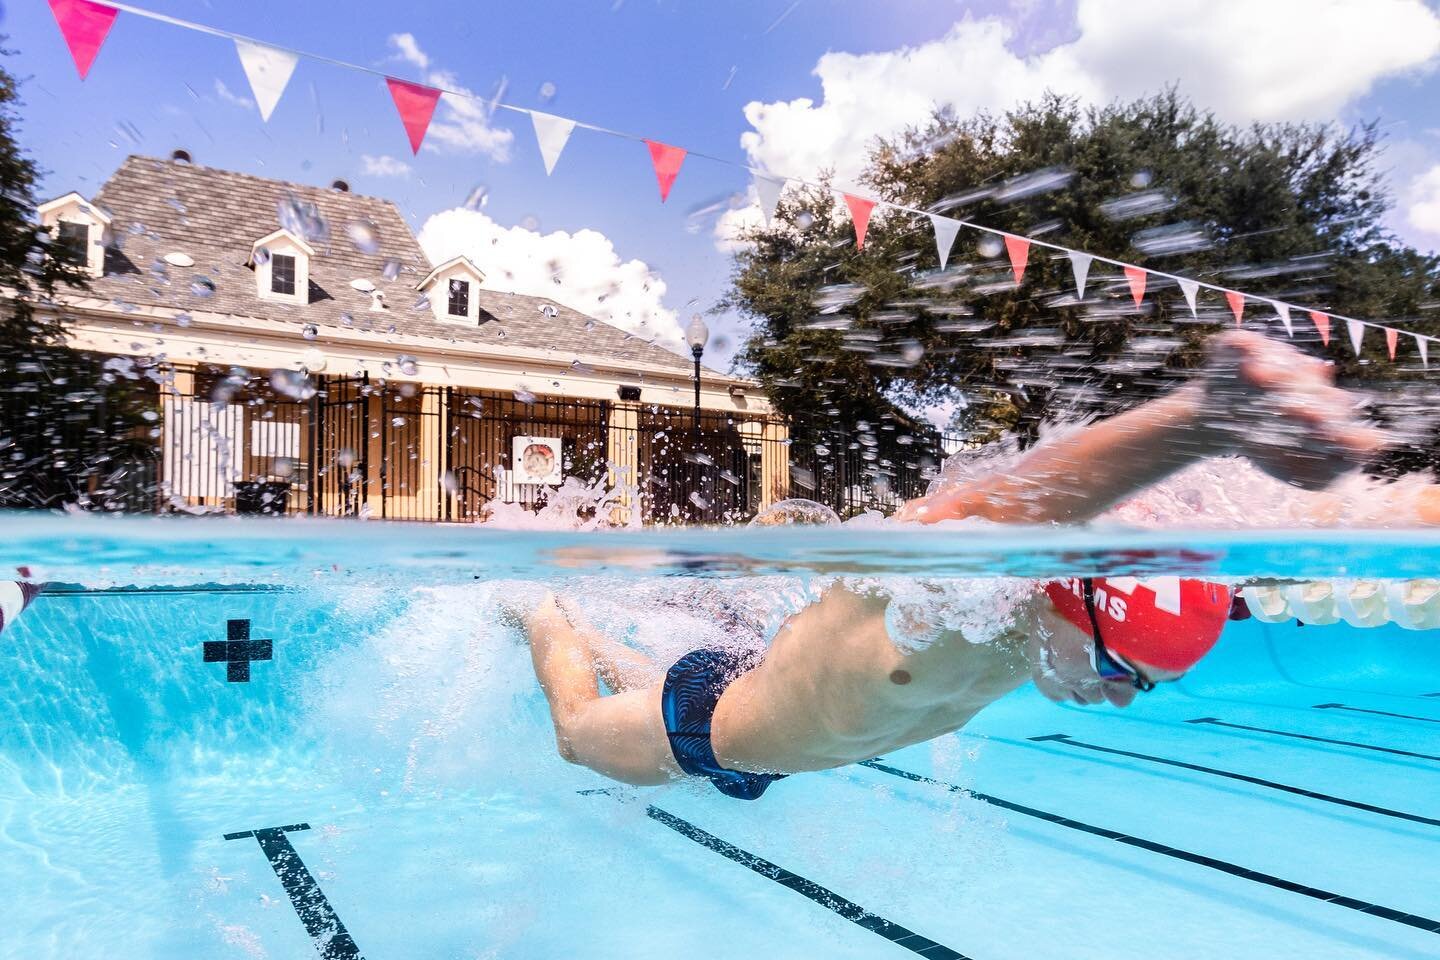 When you gotta be quick with the camera and stay outta the way, getting a shot like this is nothing less than thrilling. 🏊 📸 💯
.
.
.
#swimteam #swimmer #usaswim #swimming #swimlife #swimtraining #splitshot #butterflystroke #butterflyswimming #usas